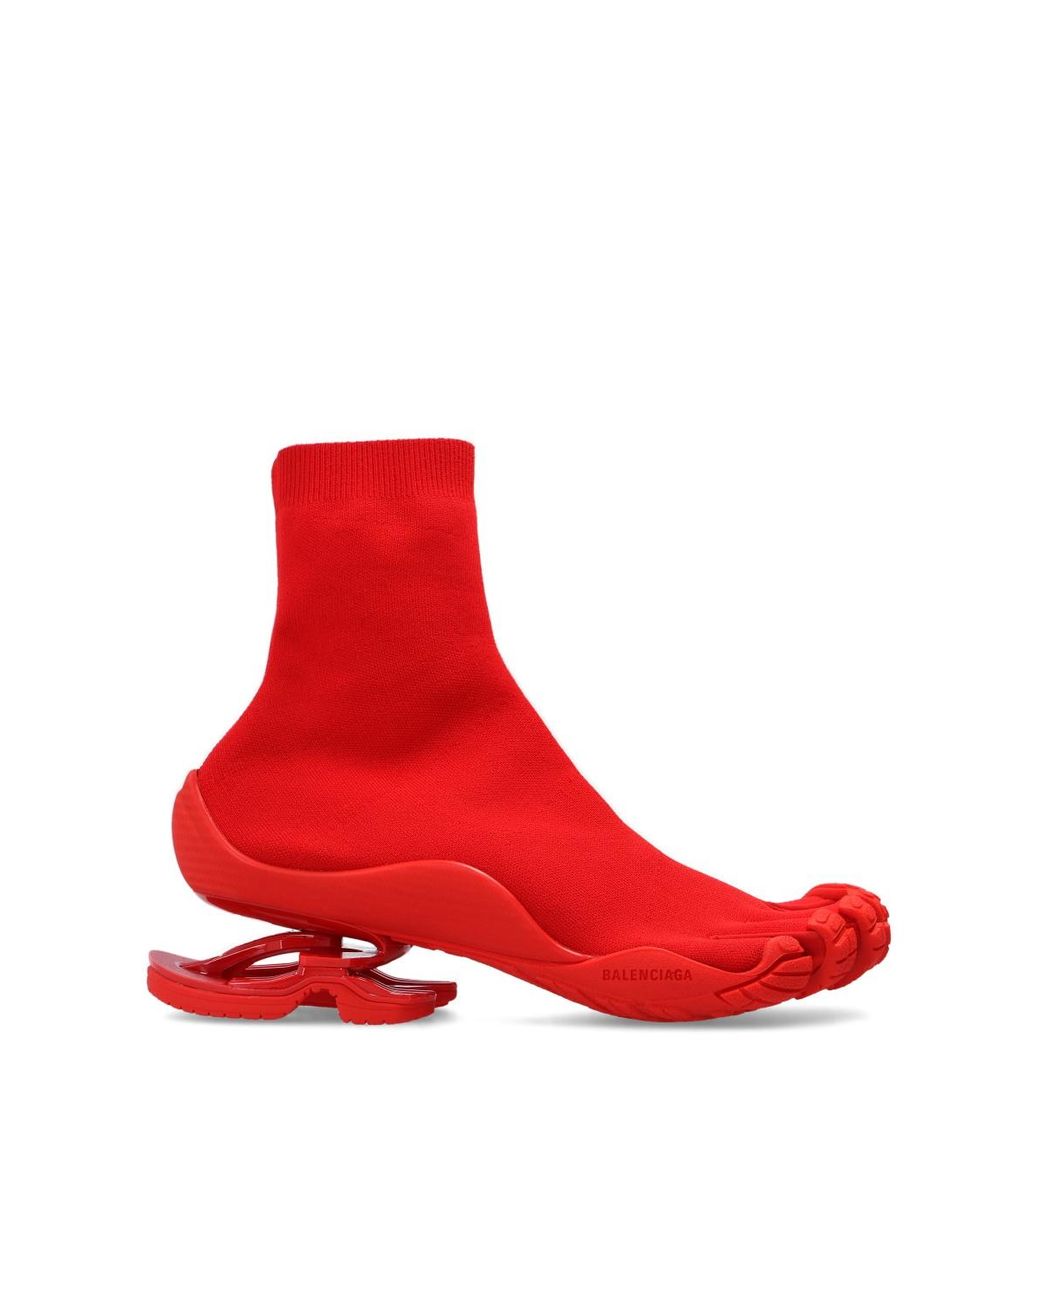 Balenciaga Sock Sneakers in Red for Men - Lyst